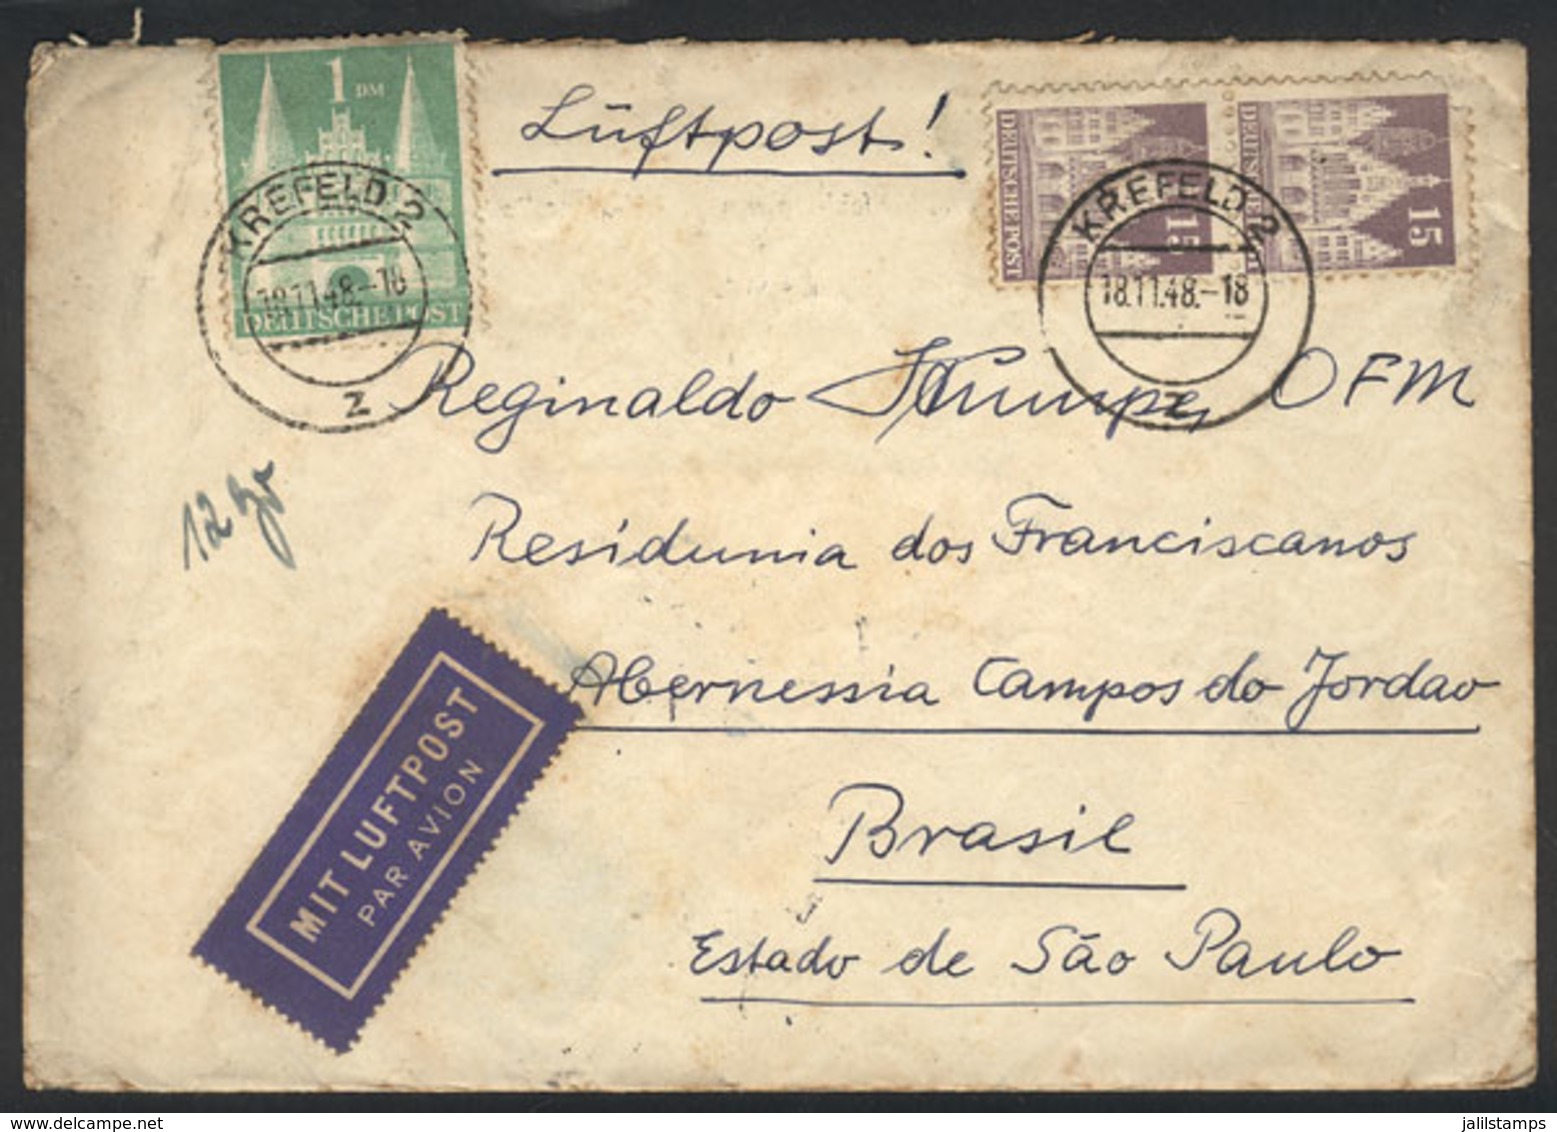 GERMANY: Airmail Cover Sent From Krefeld To Brazil On 18/NO/1948 Franked With 1.30Dm., Interesting! - Precursores